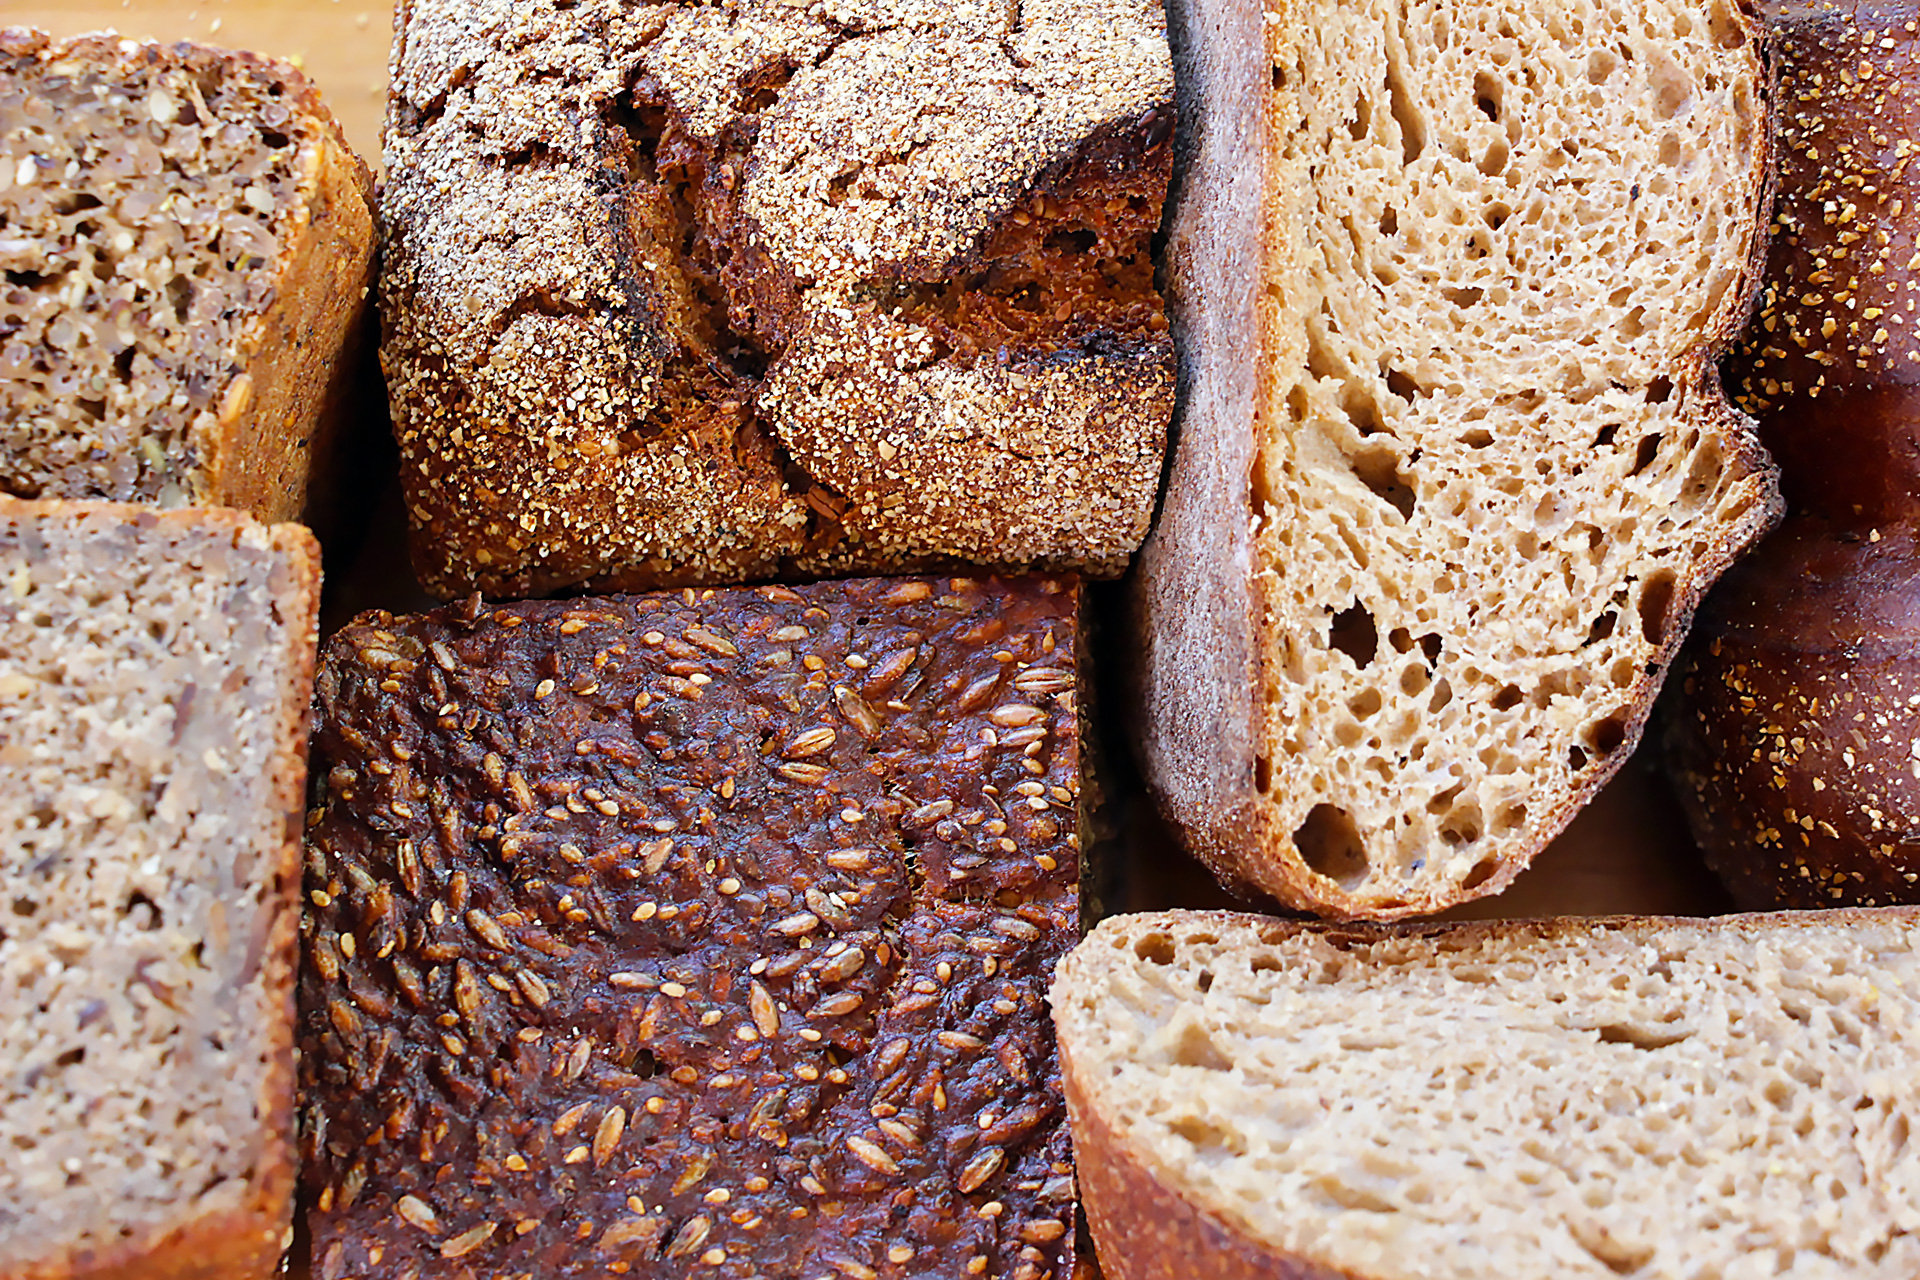 The interiors exposed of rye breads from San Francisco bakeries.